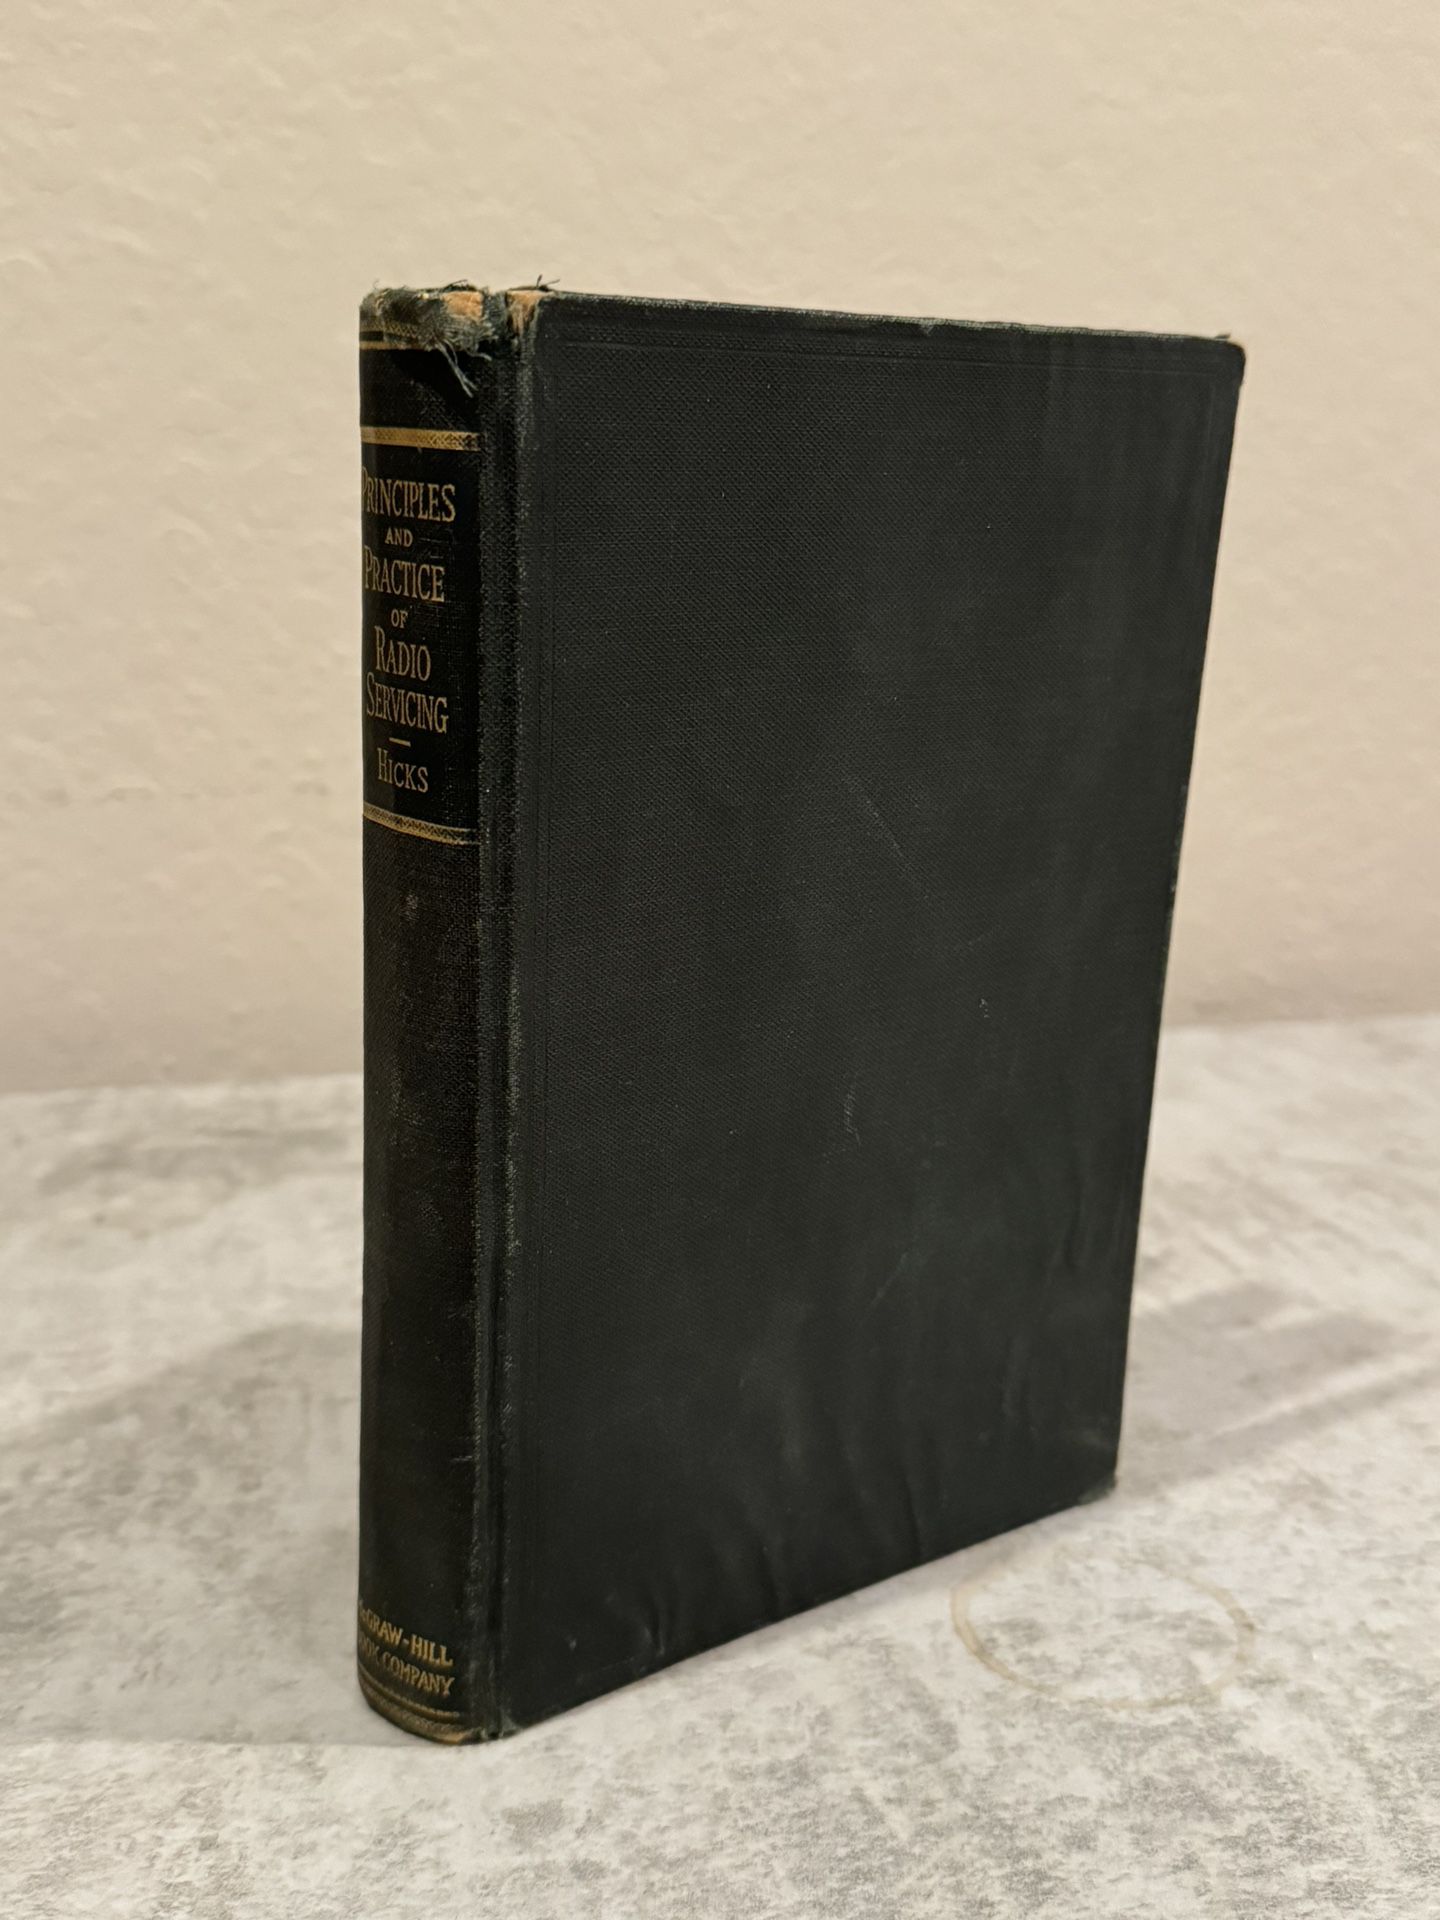 Principles and Practice of Radio Servicing Hardcover 1939 by H.J. Hicks 1st 4th 